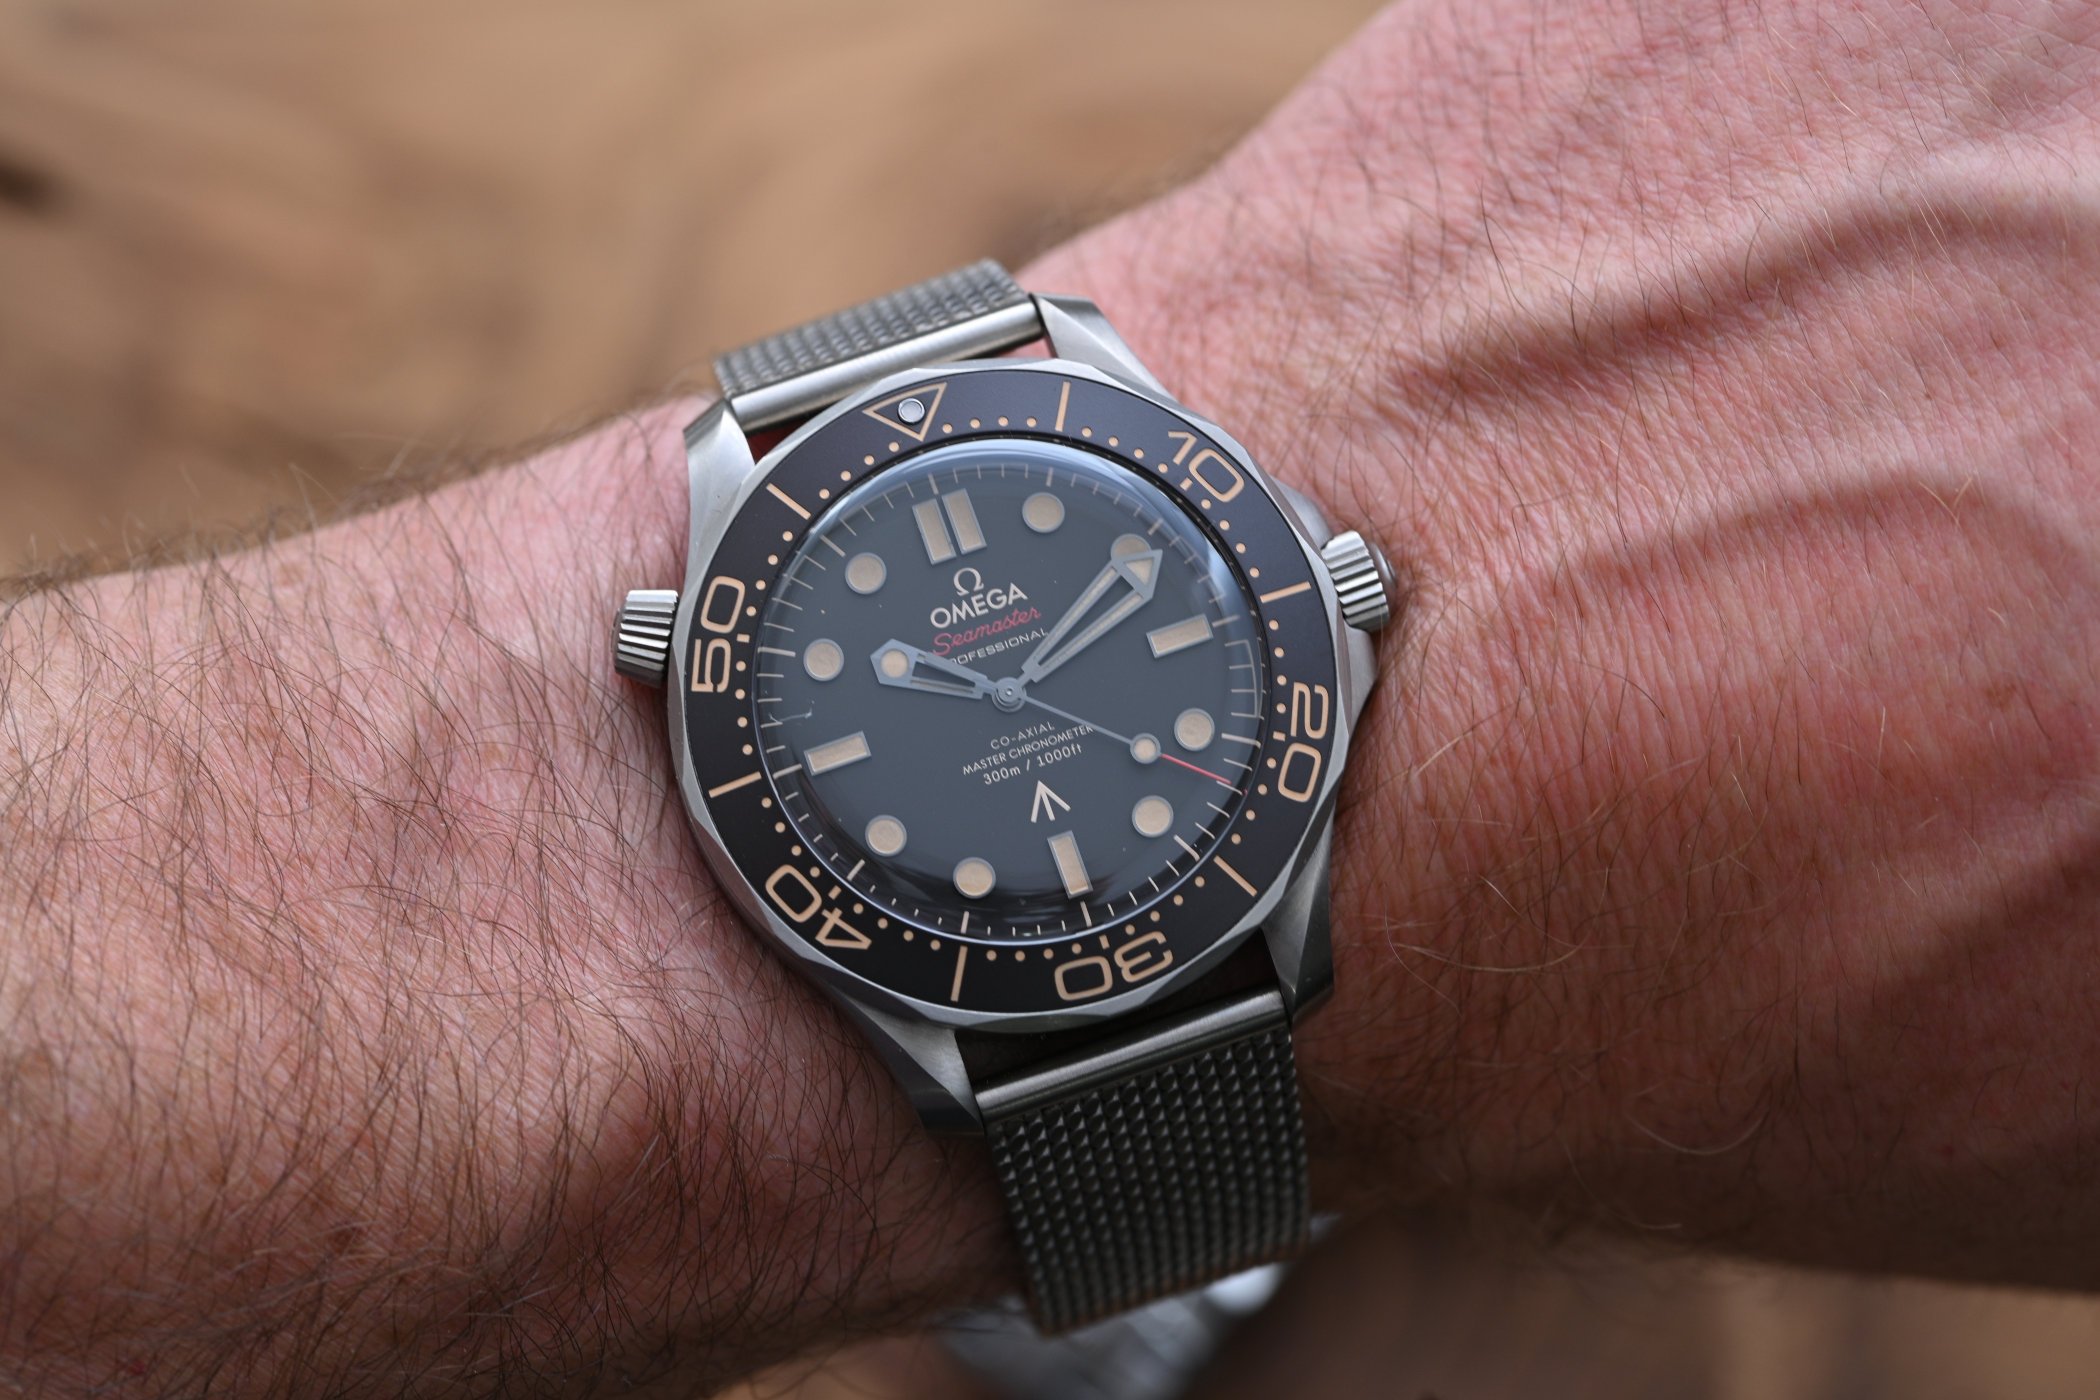 Omega Seamaster Diver 300M 007 Edition - Monochrome Watches